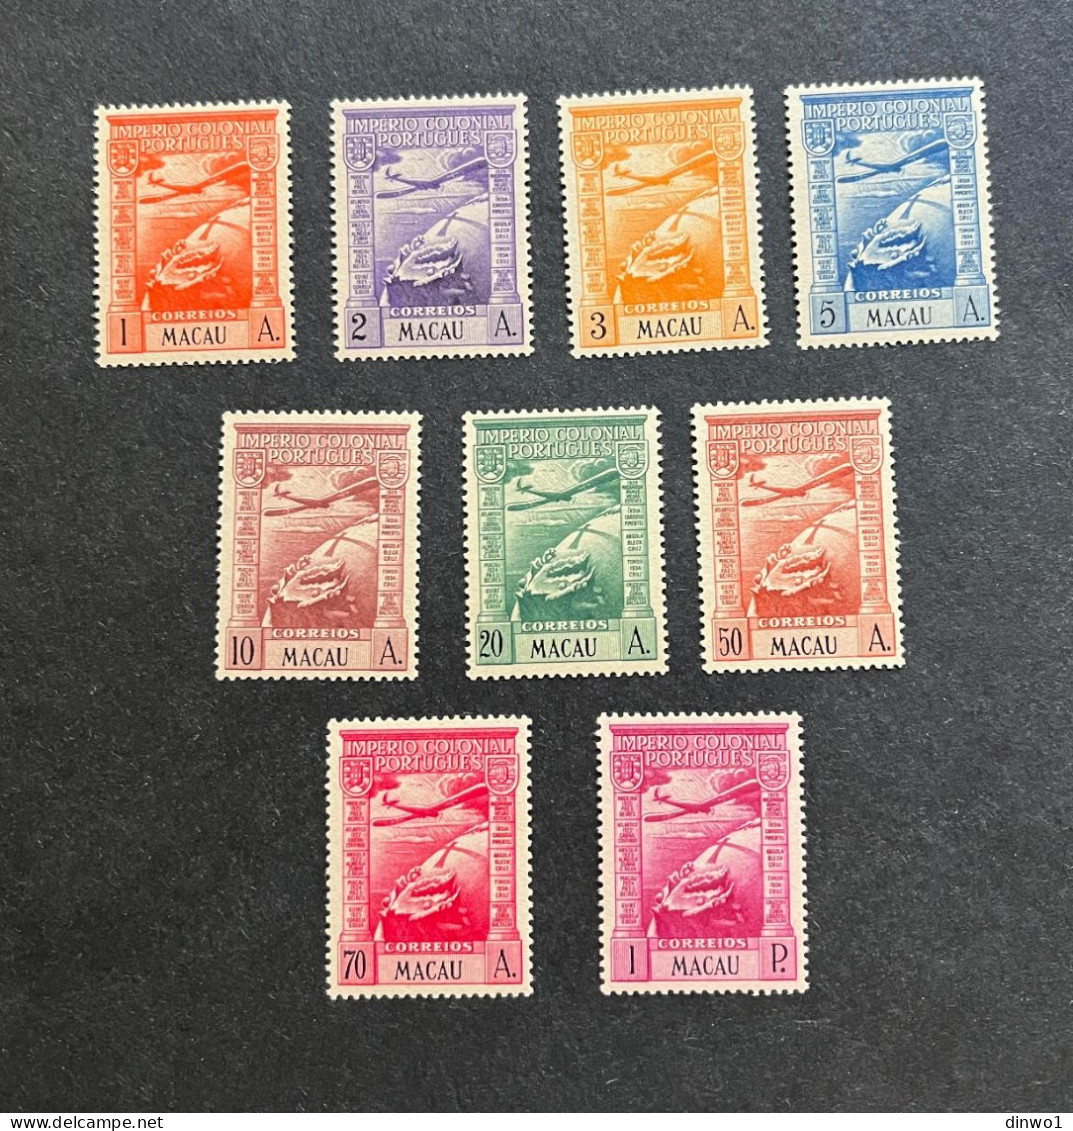 (Tv) Macao Macau 1938 EMPIRE IMPERIO AIR MAIL Complete Set - MNH - Unused Stamps